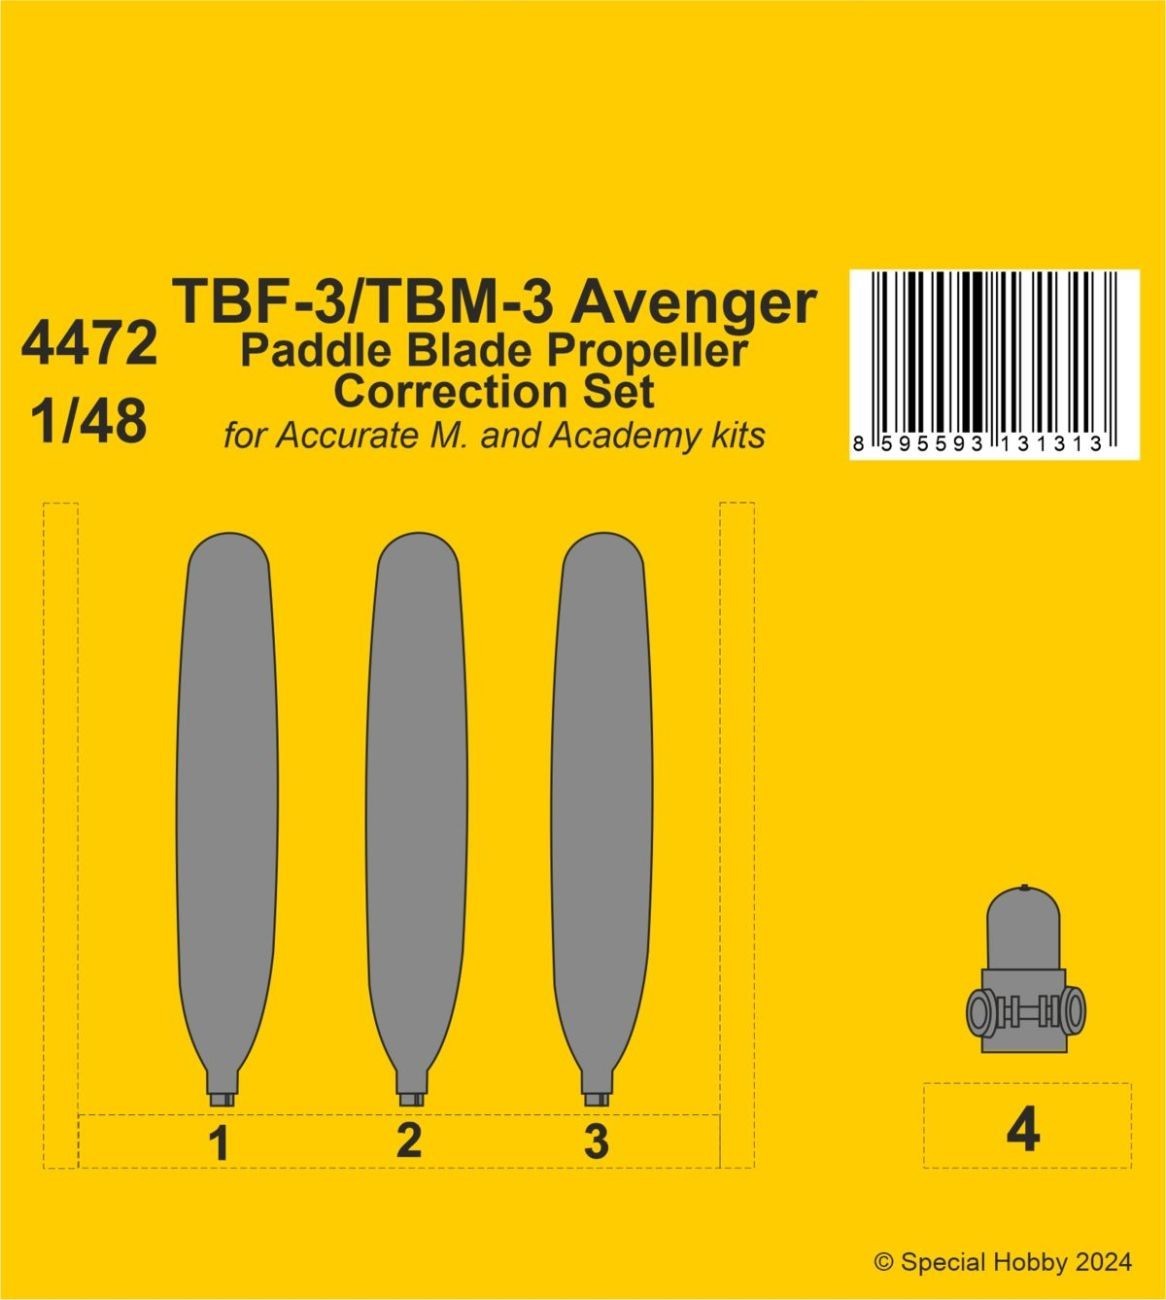 TBF-3/TBM-3 Avenger Paddle Blade Propeller Correction Set 1:48 for Accurate/Academy kits